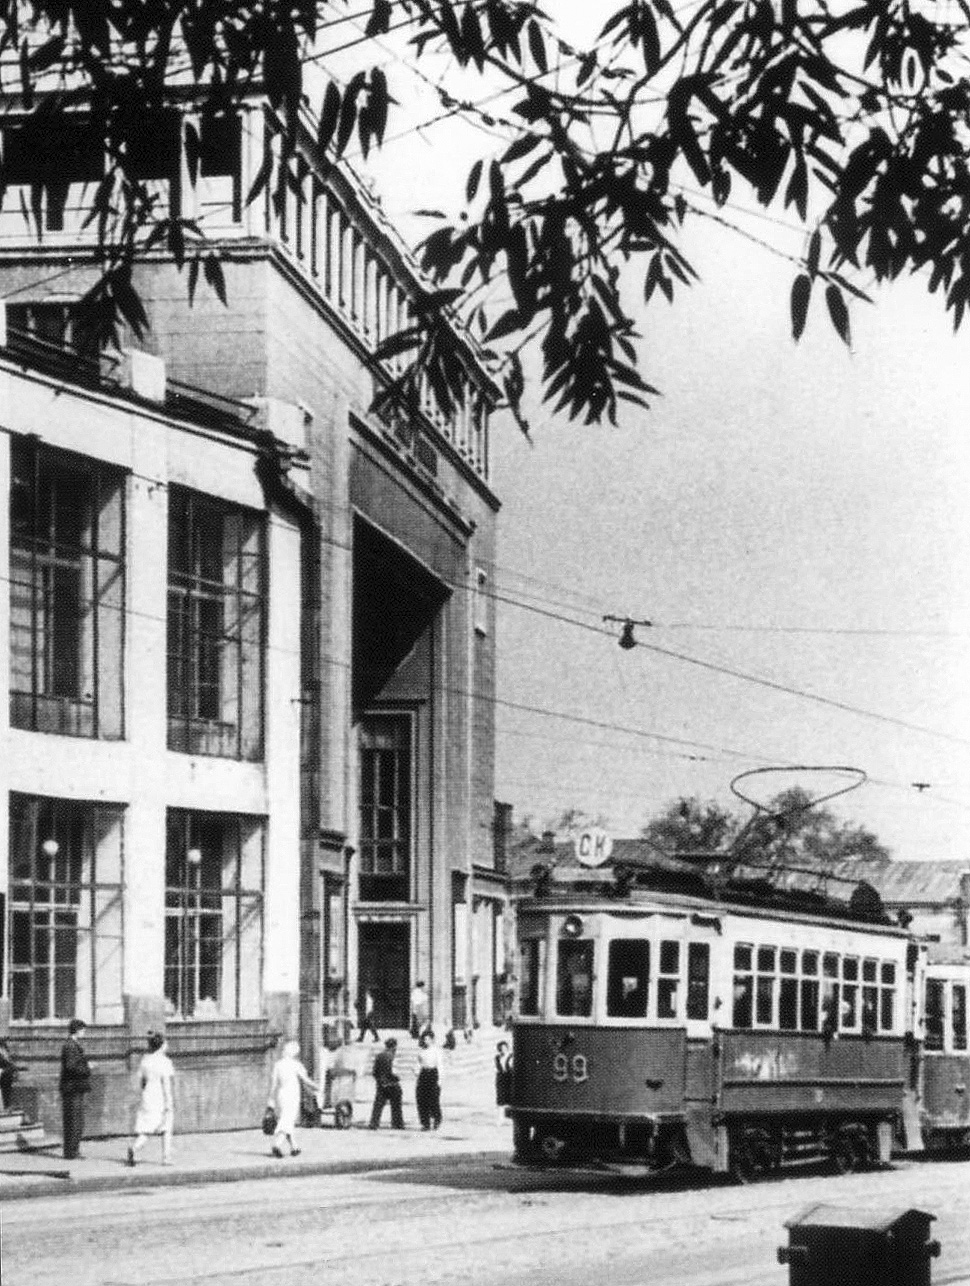 Moskva, BF č. 99; Moskva — Historical photos — Tramway and Trolleybus (1946-1991)